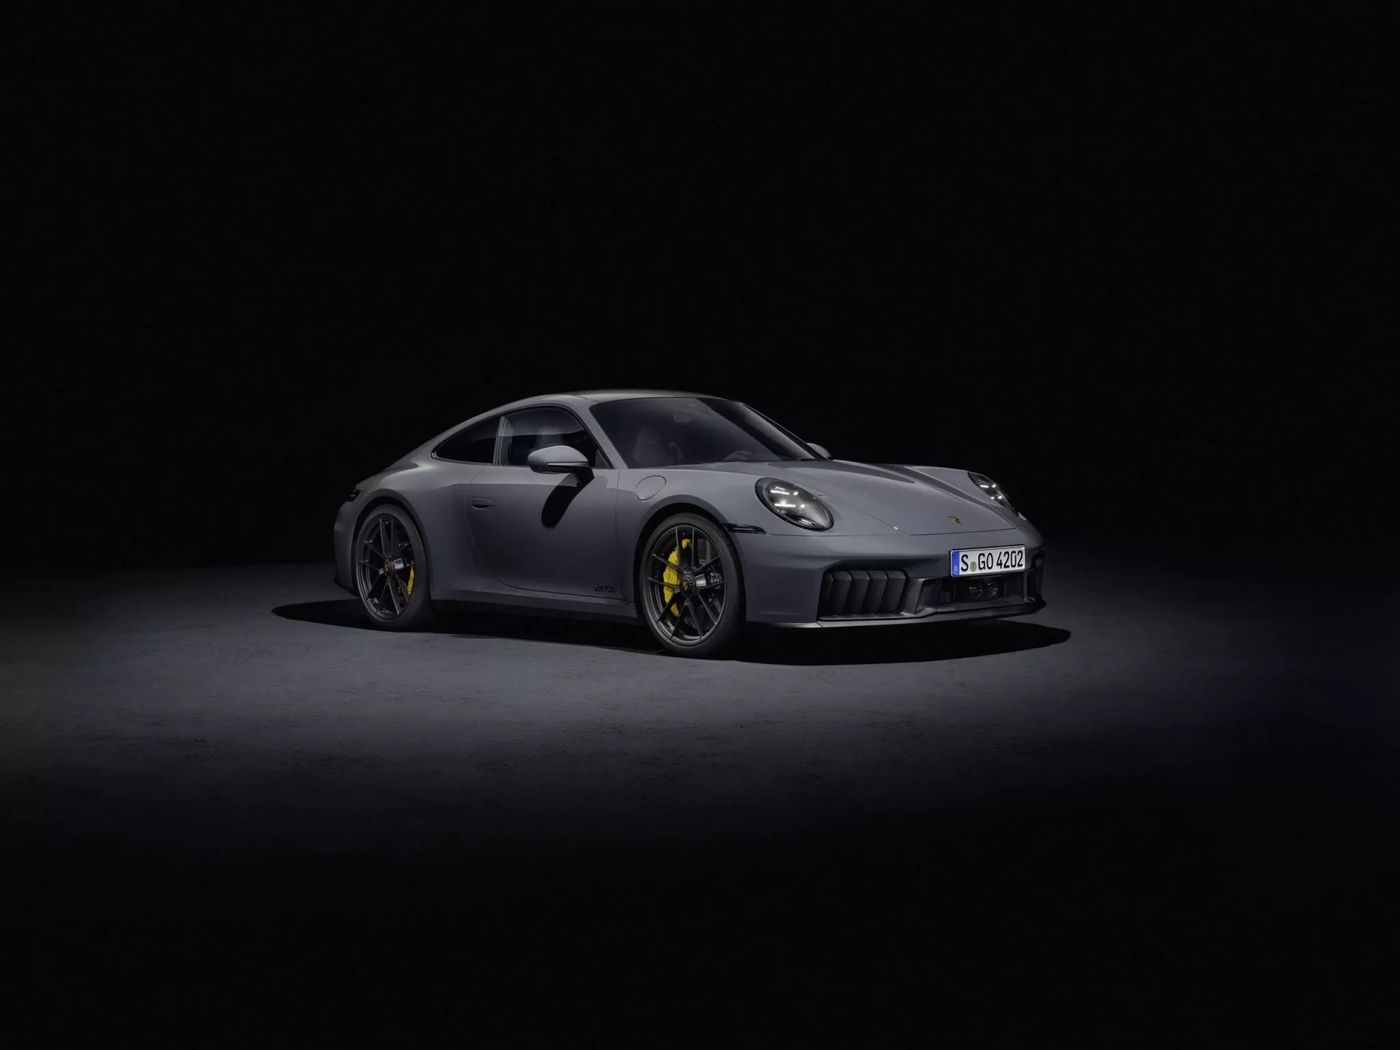 Hybrid Porsche 911 Introduced: Here are the Details